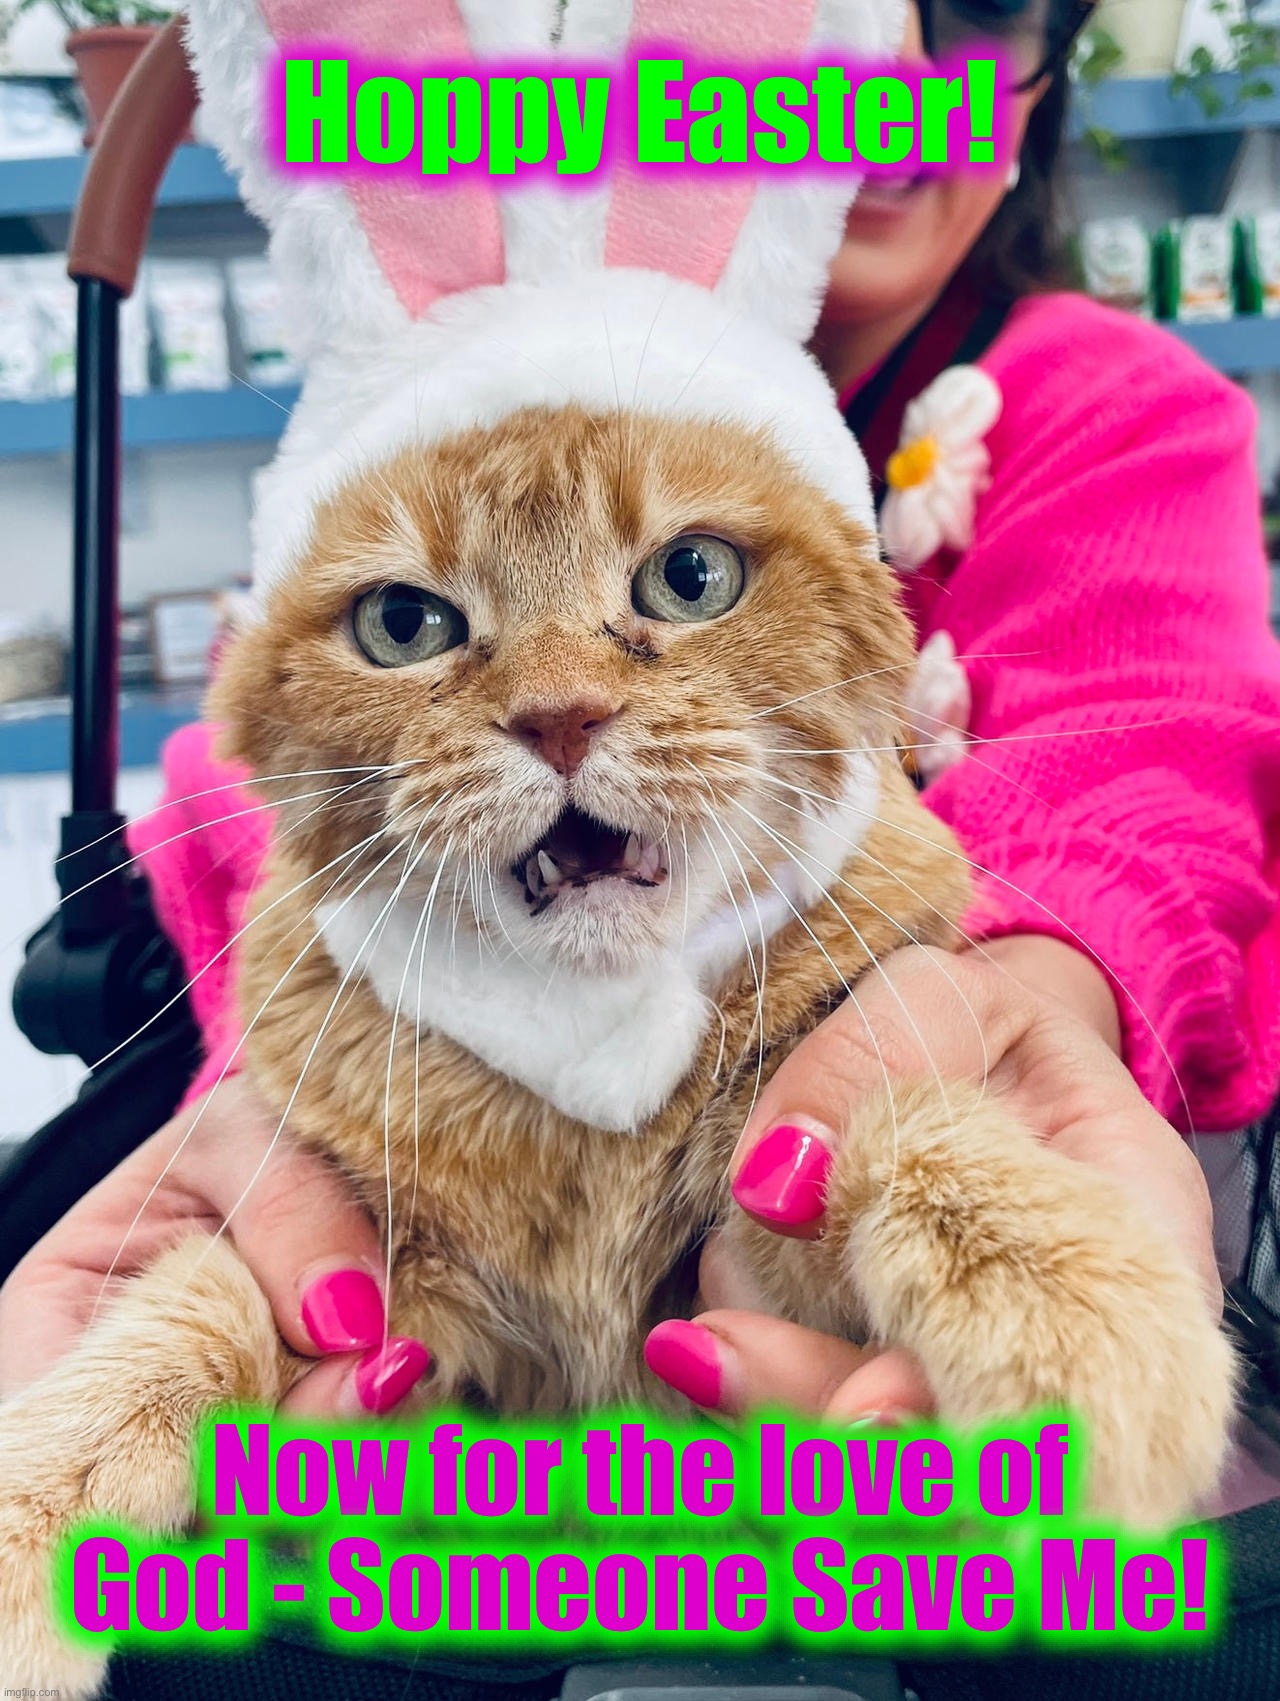 Happy Easter | Hoppy Easter! Now for the love of God - Someone Save Me! | image tagged in easter cat,happy easter,memes,easter bunny,save me | made w/ Imgflip meme maker